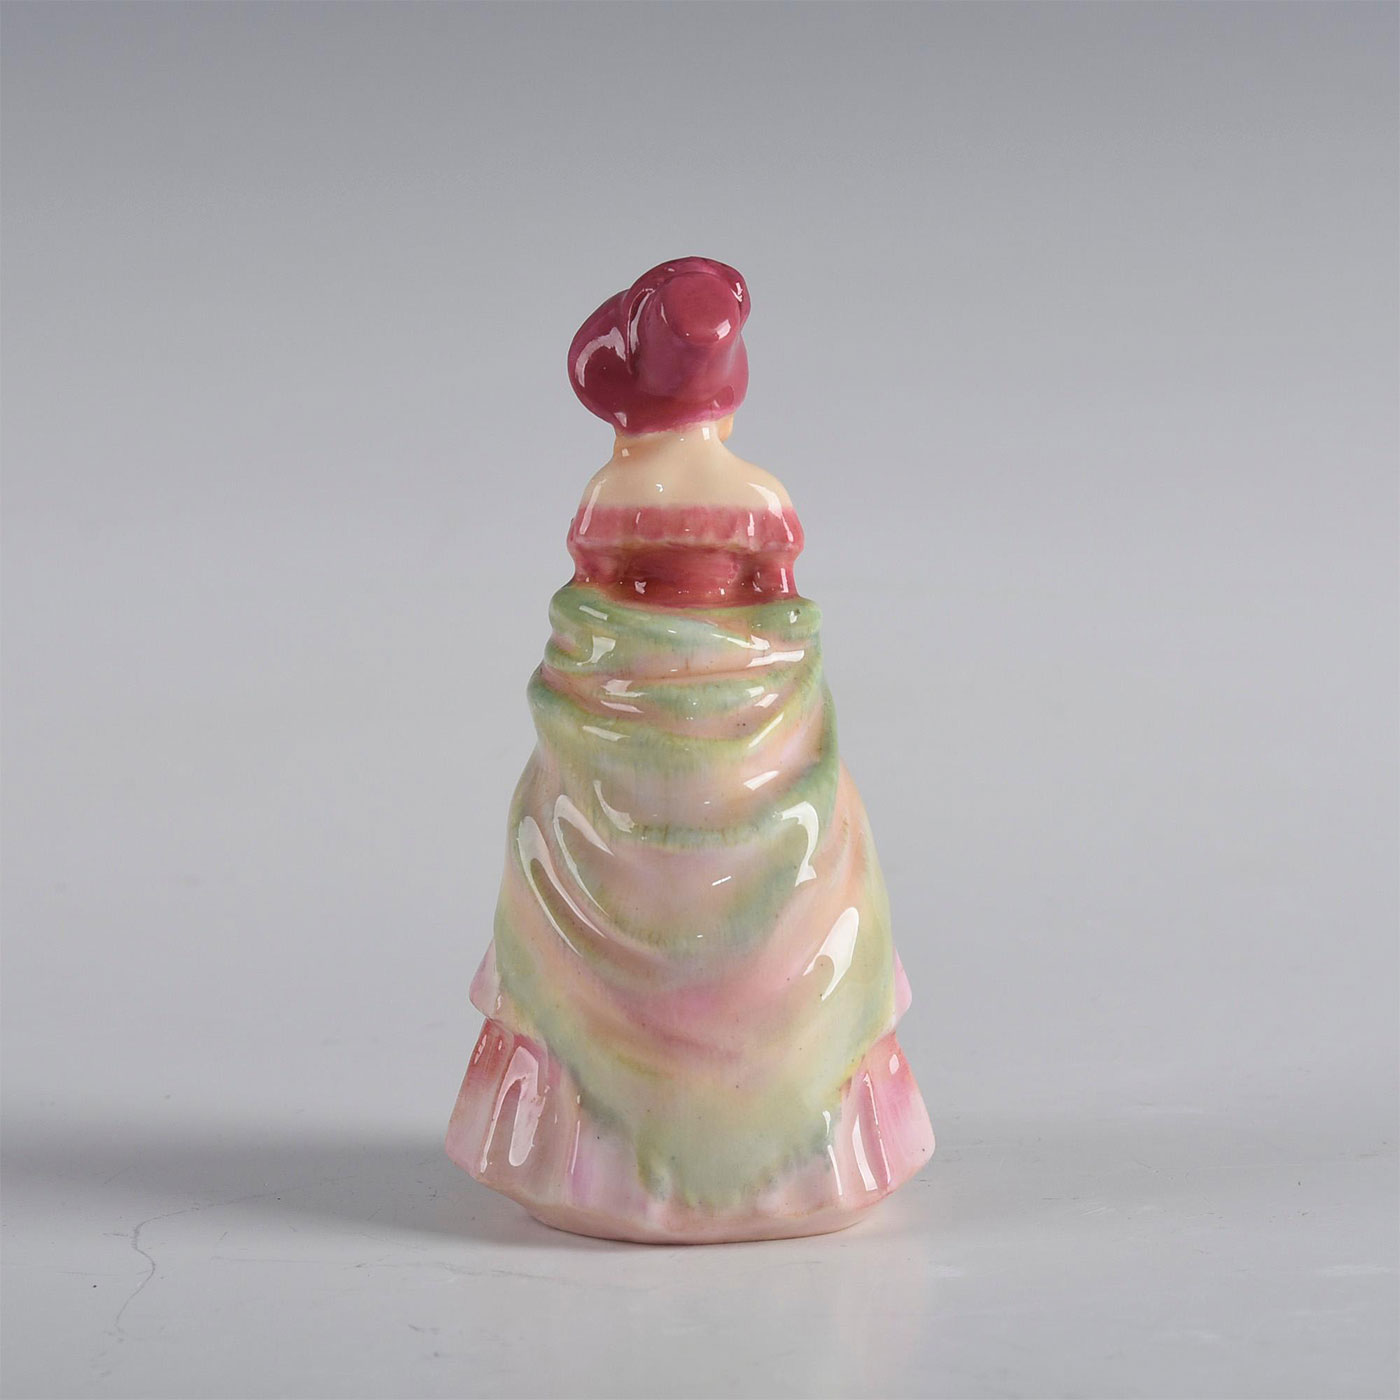 ROYAL DOULTON MINIATURE FIGURINE, VICTORIAN LADY - Image 3 of 5